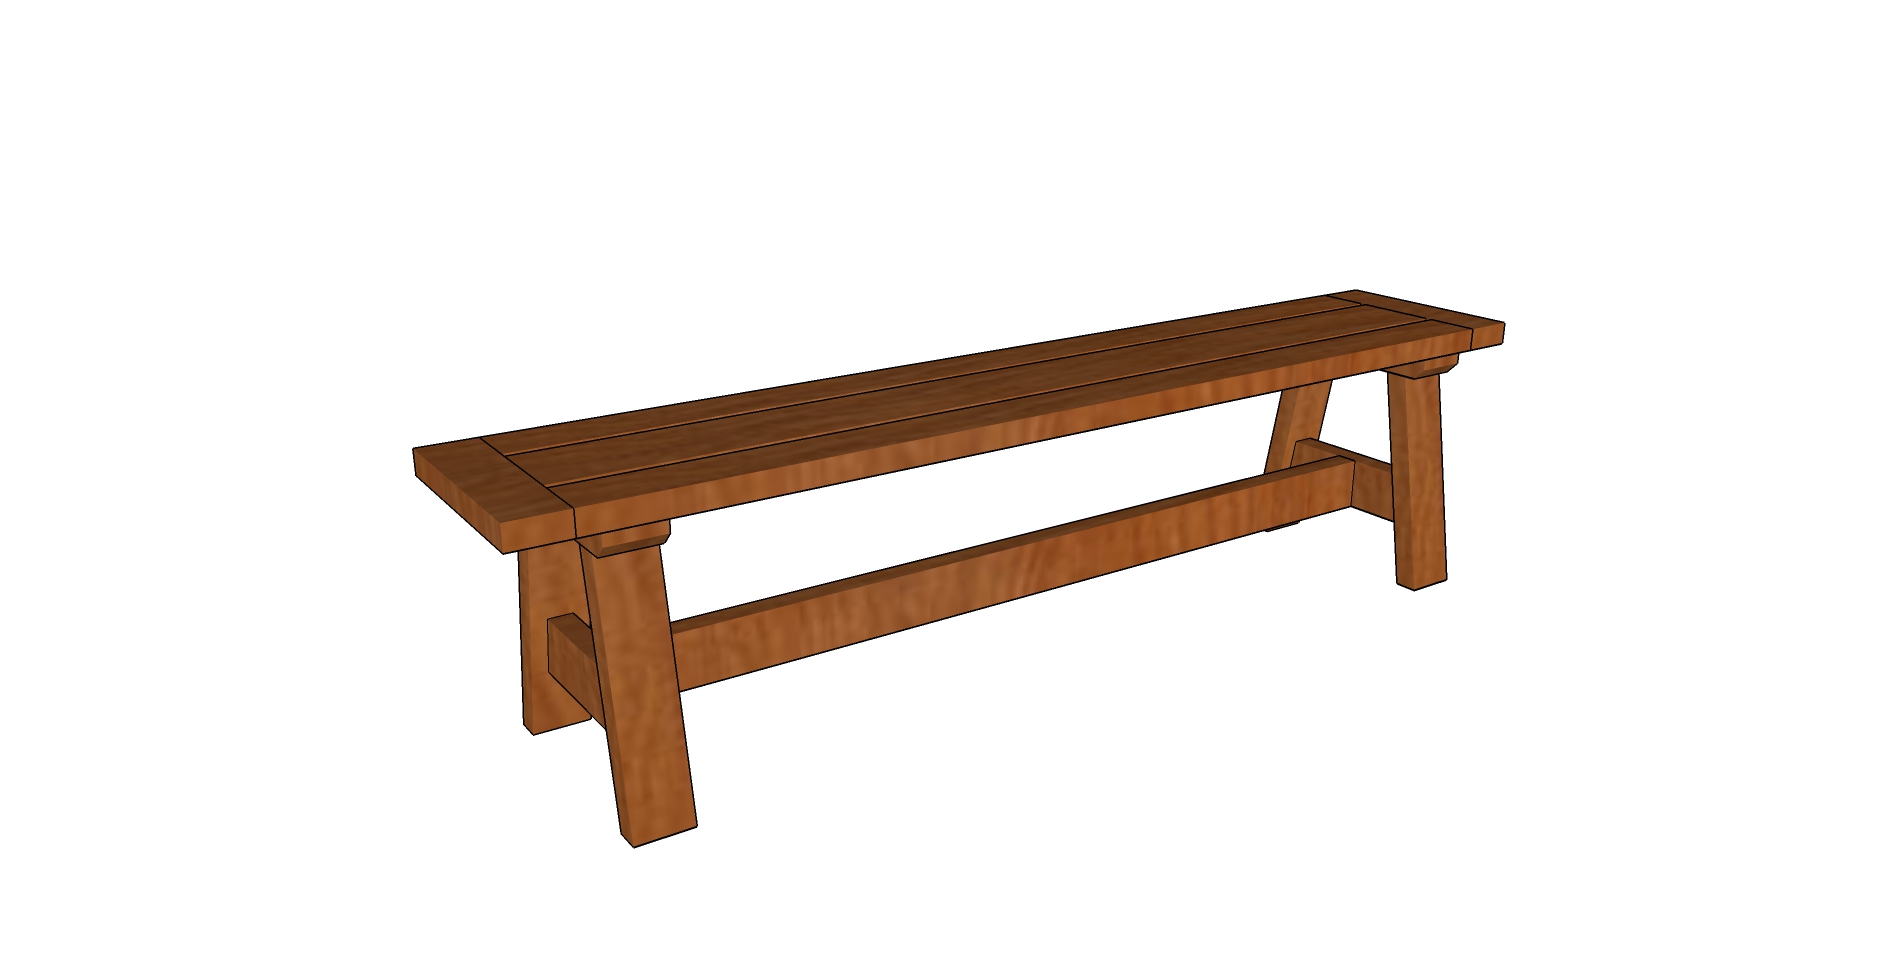 Table bench plans